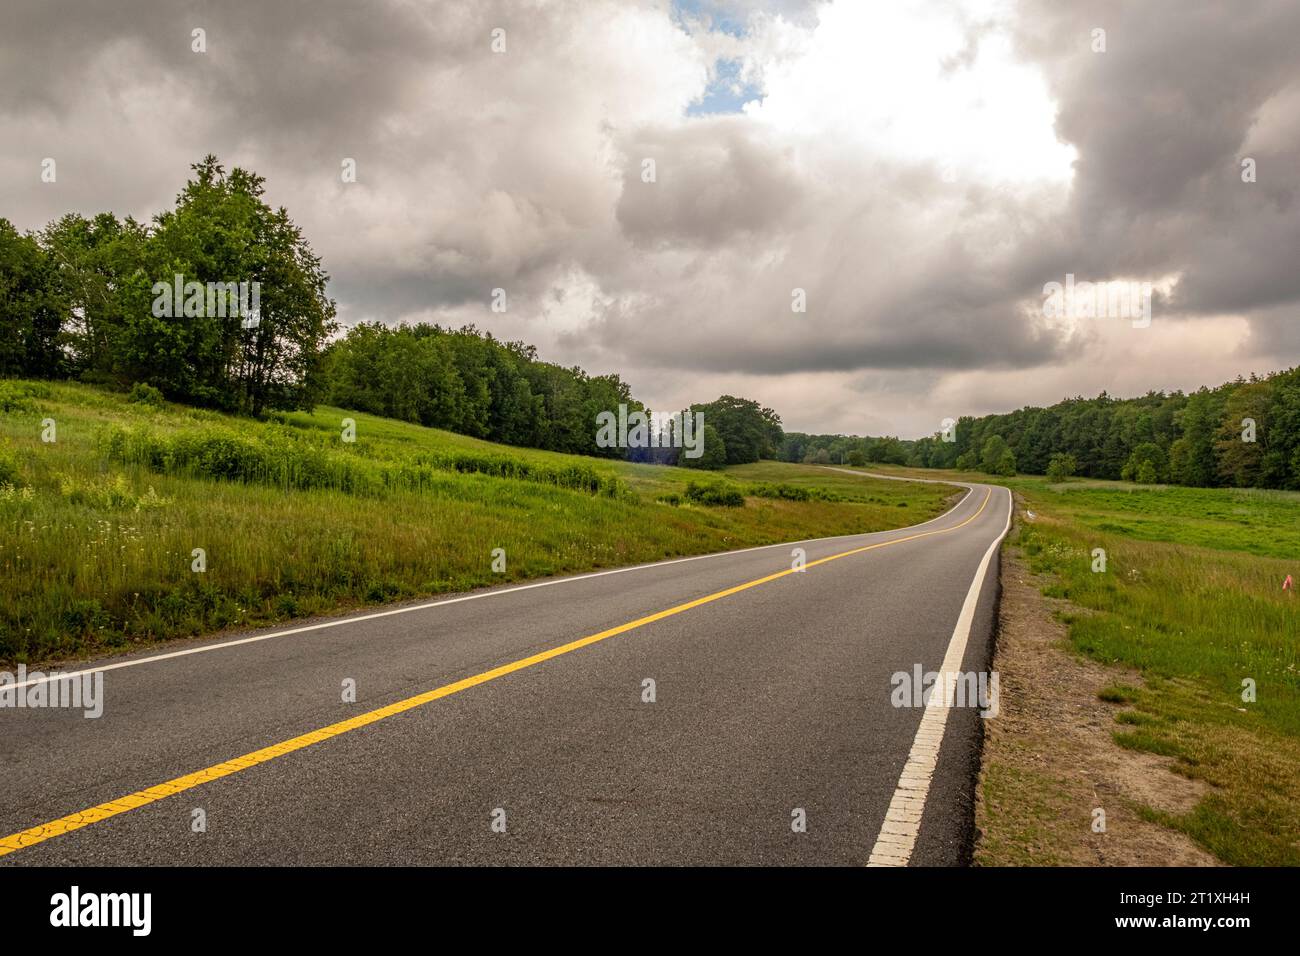 Storm clouds hover over the road in rural Templeton, Massachusetts Stock Photo